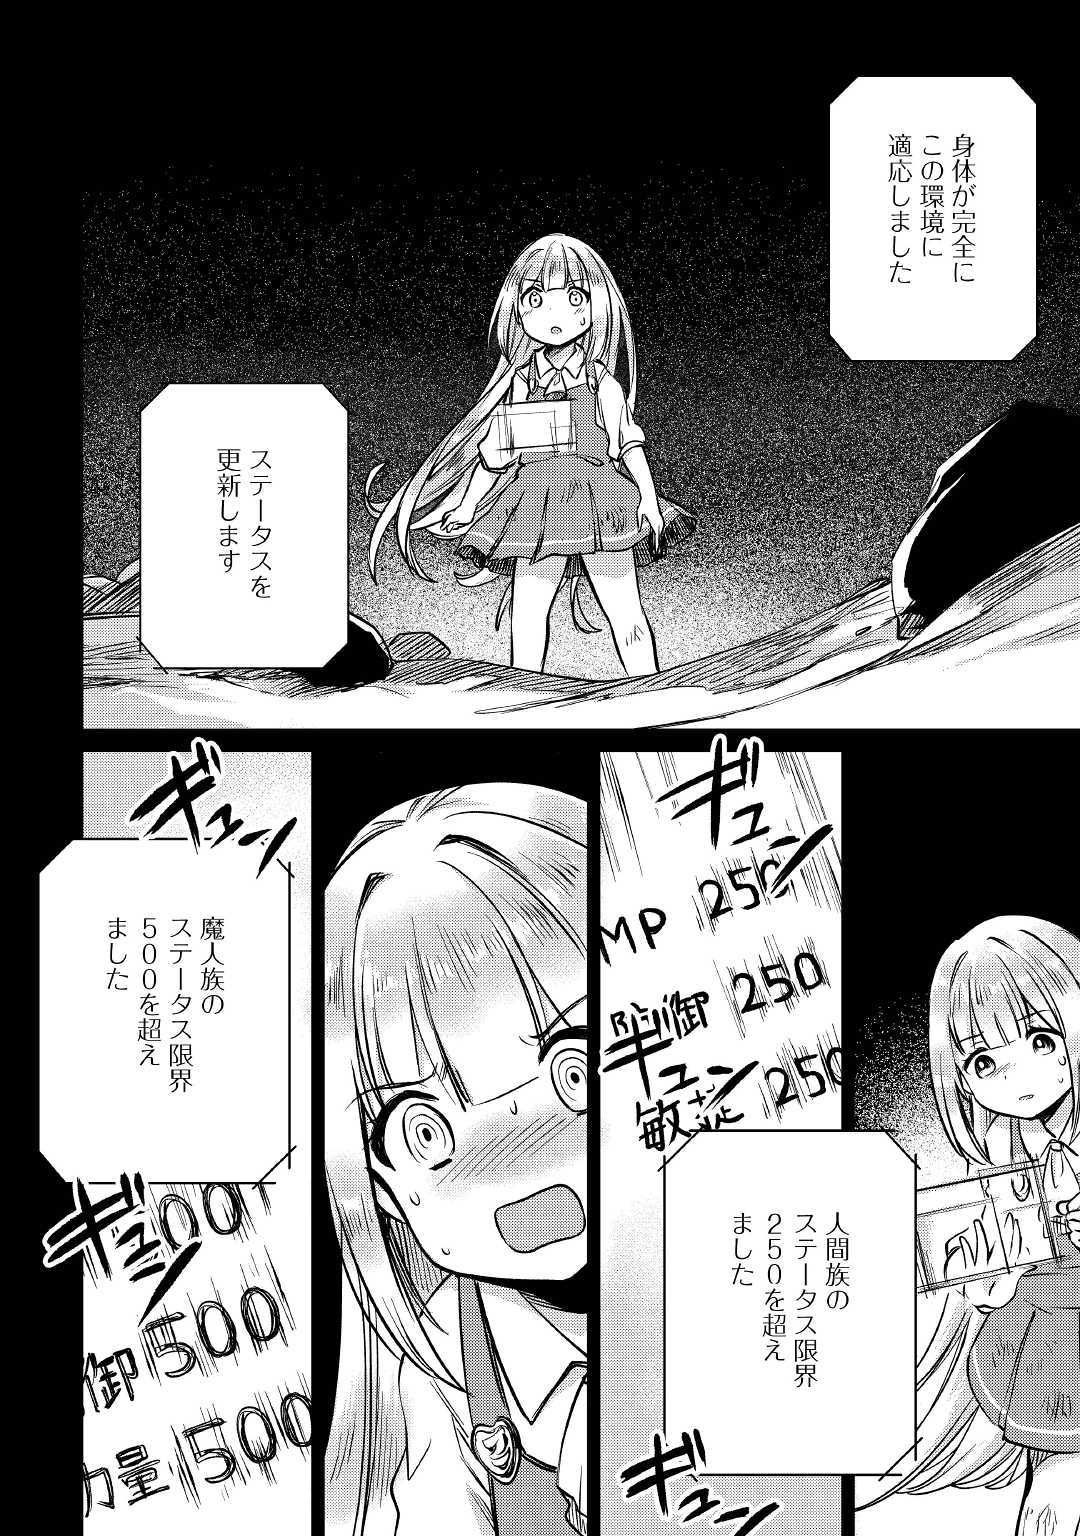 The Former Structural Researcher’s Story of Otherworldly Adventure 第13話 - Page 14